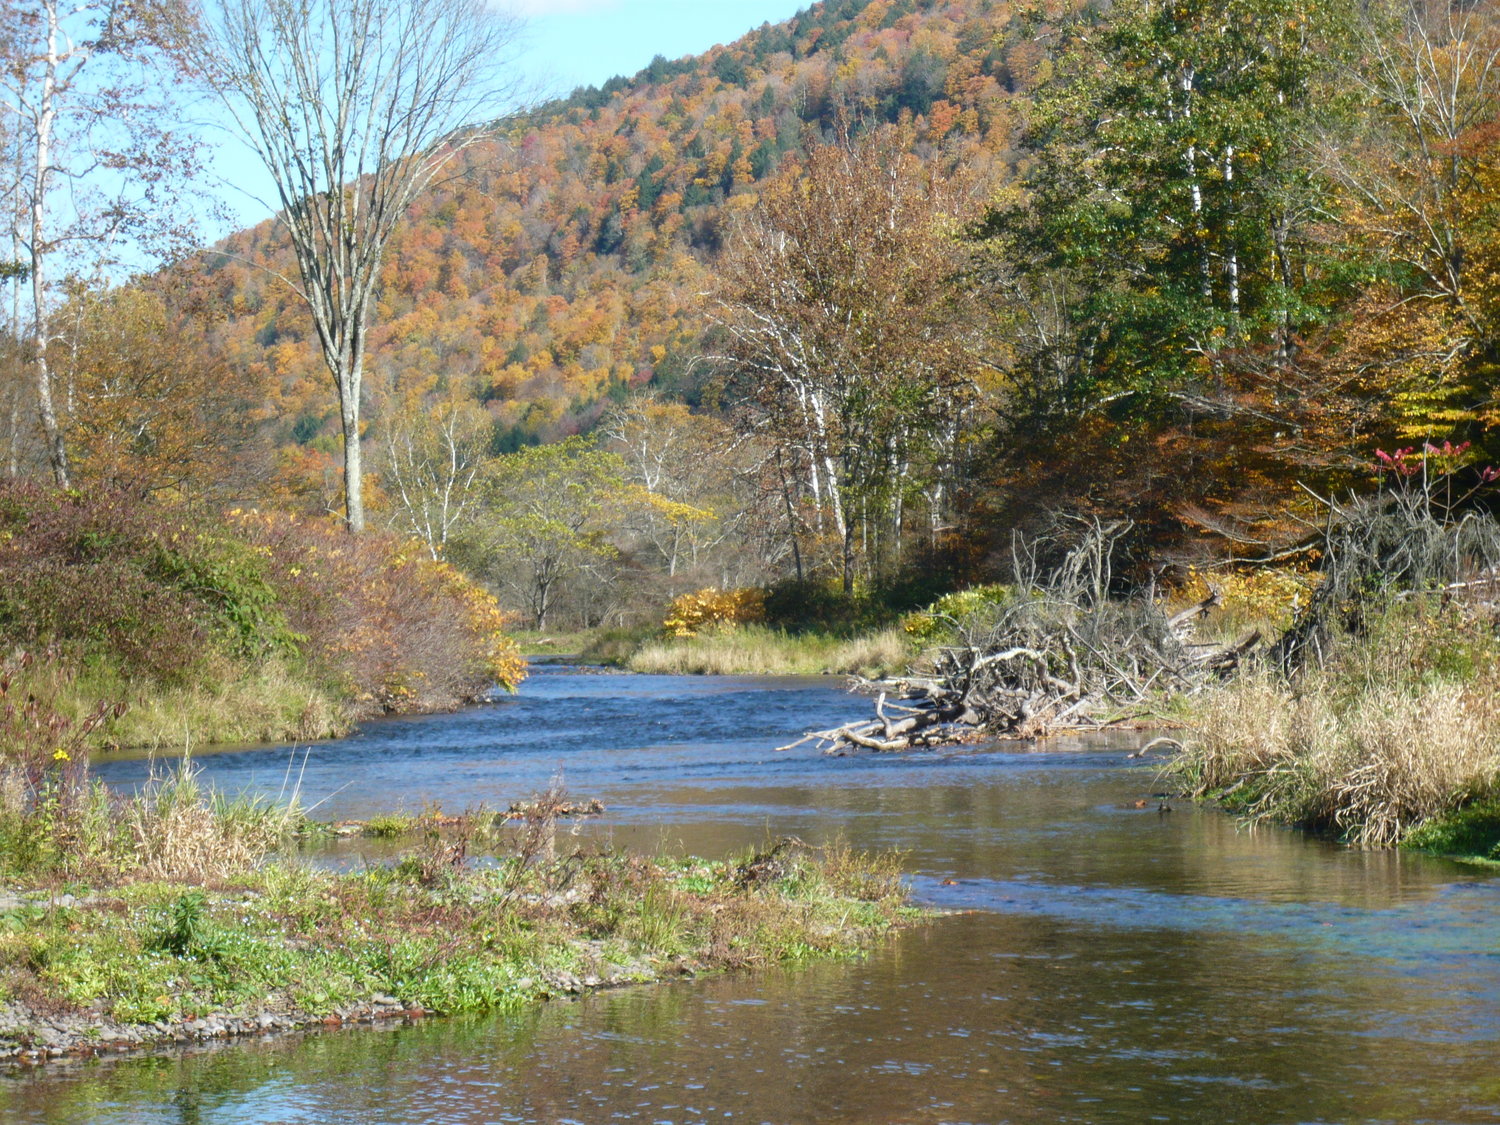 The river in fall colors.